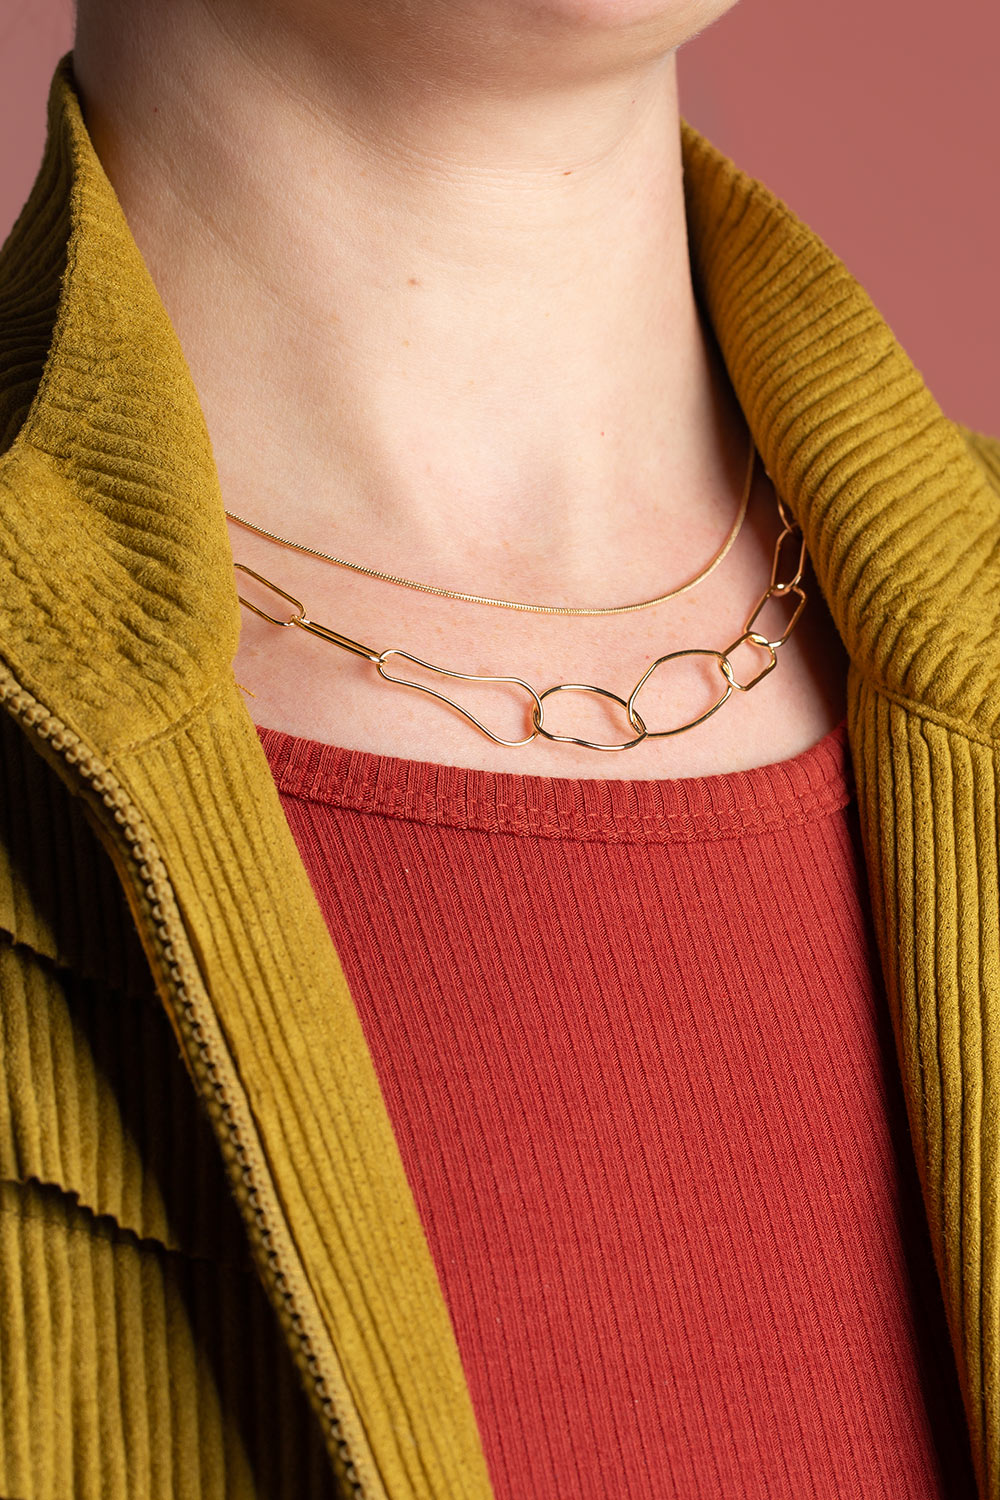 Type 3 Take the Oblong Way Necklace